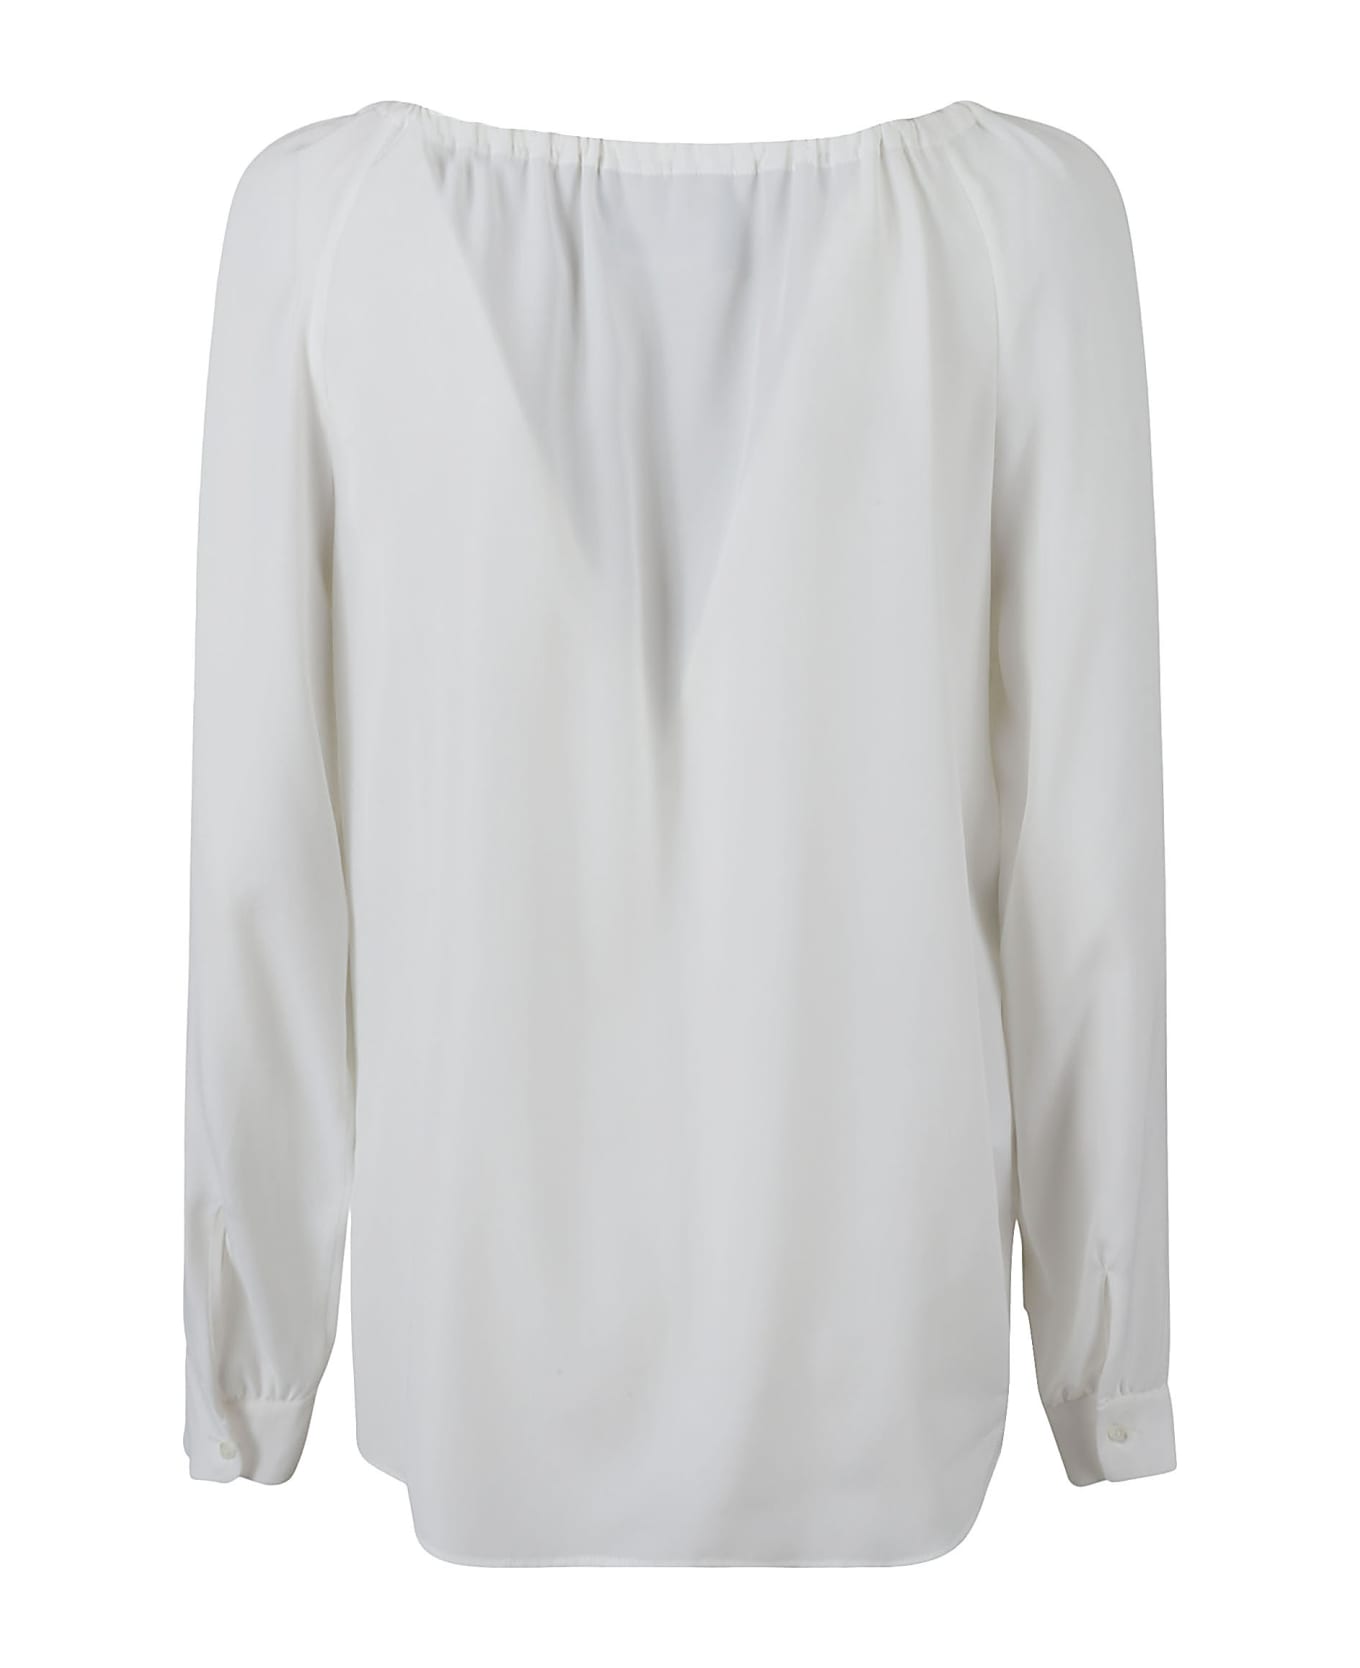 Boutique Moschino Boat Neck Blouse - White ブラウス